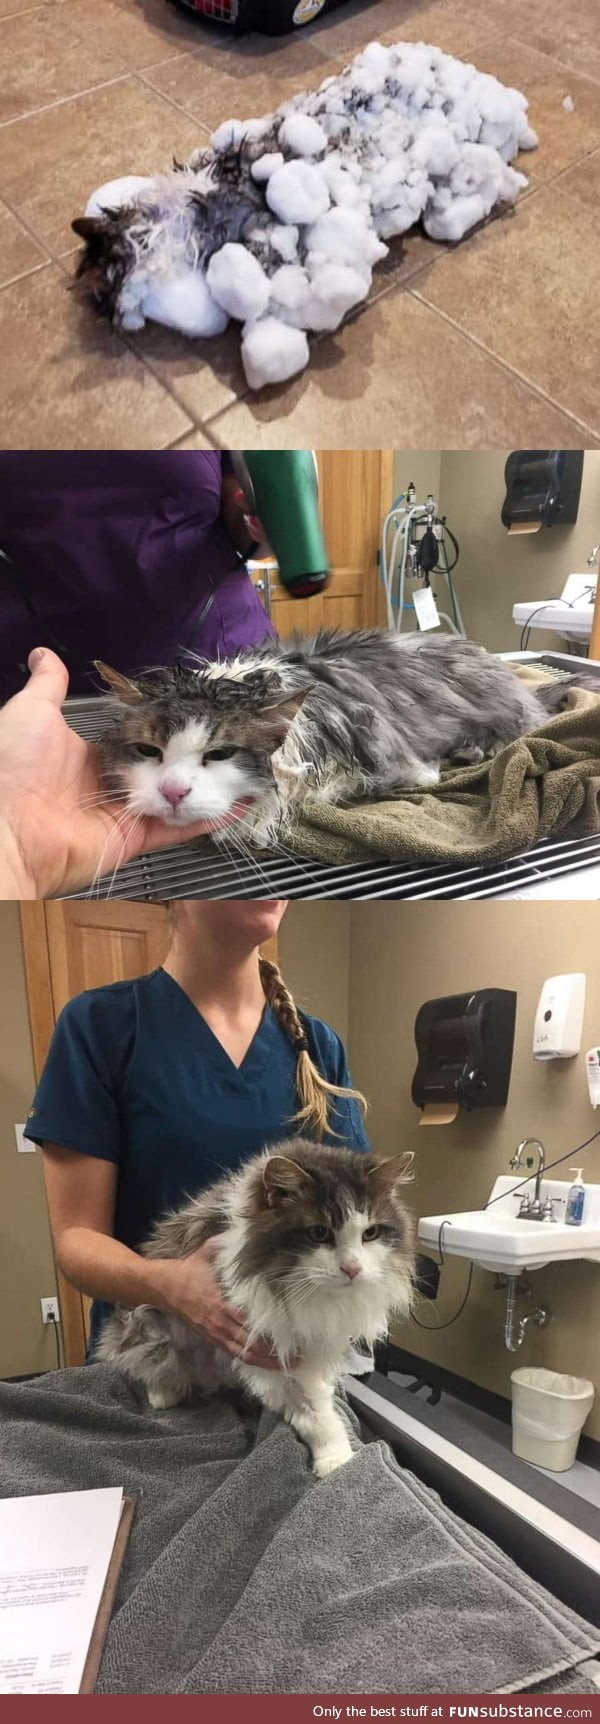 Frozen cat revived after being found in Montana snow bank